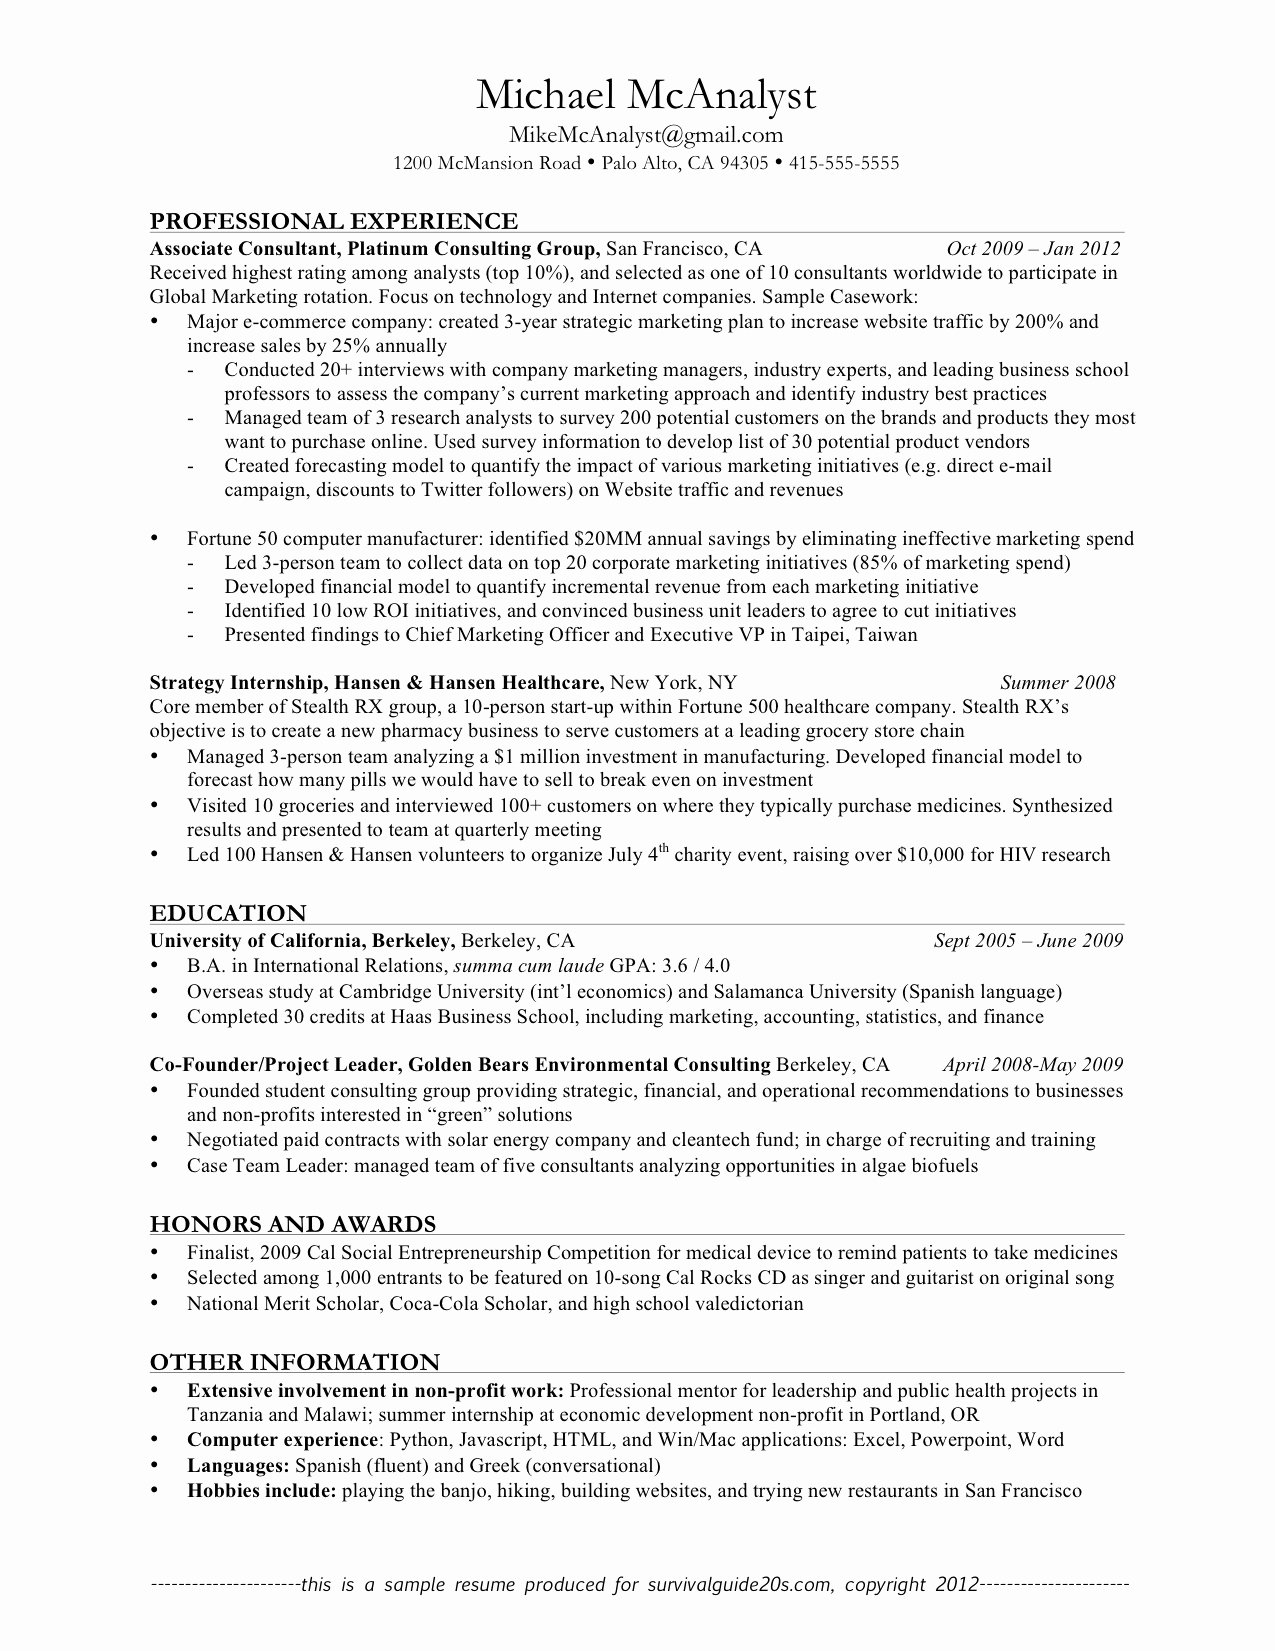 Good Resume Examples Professional Experience